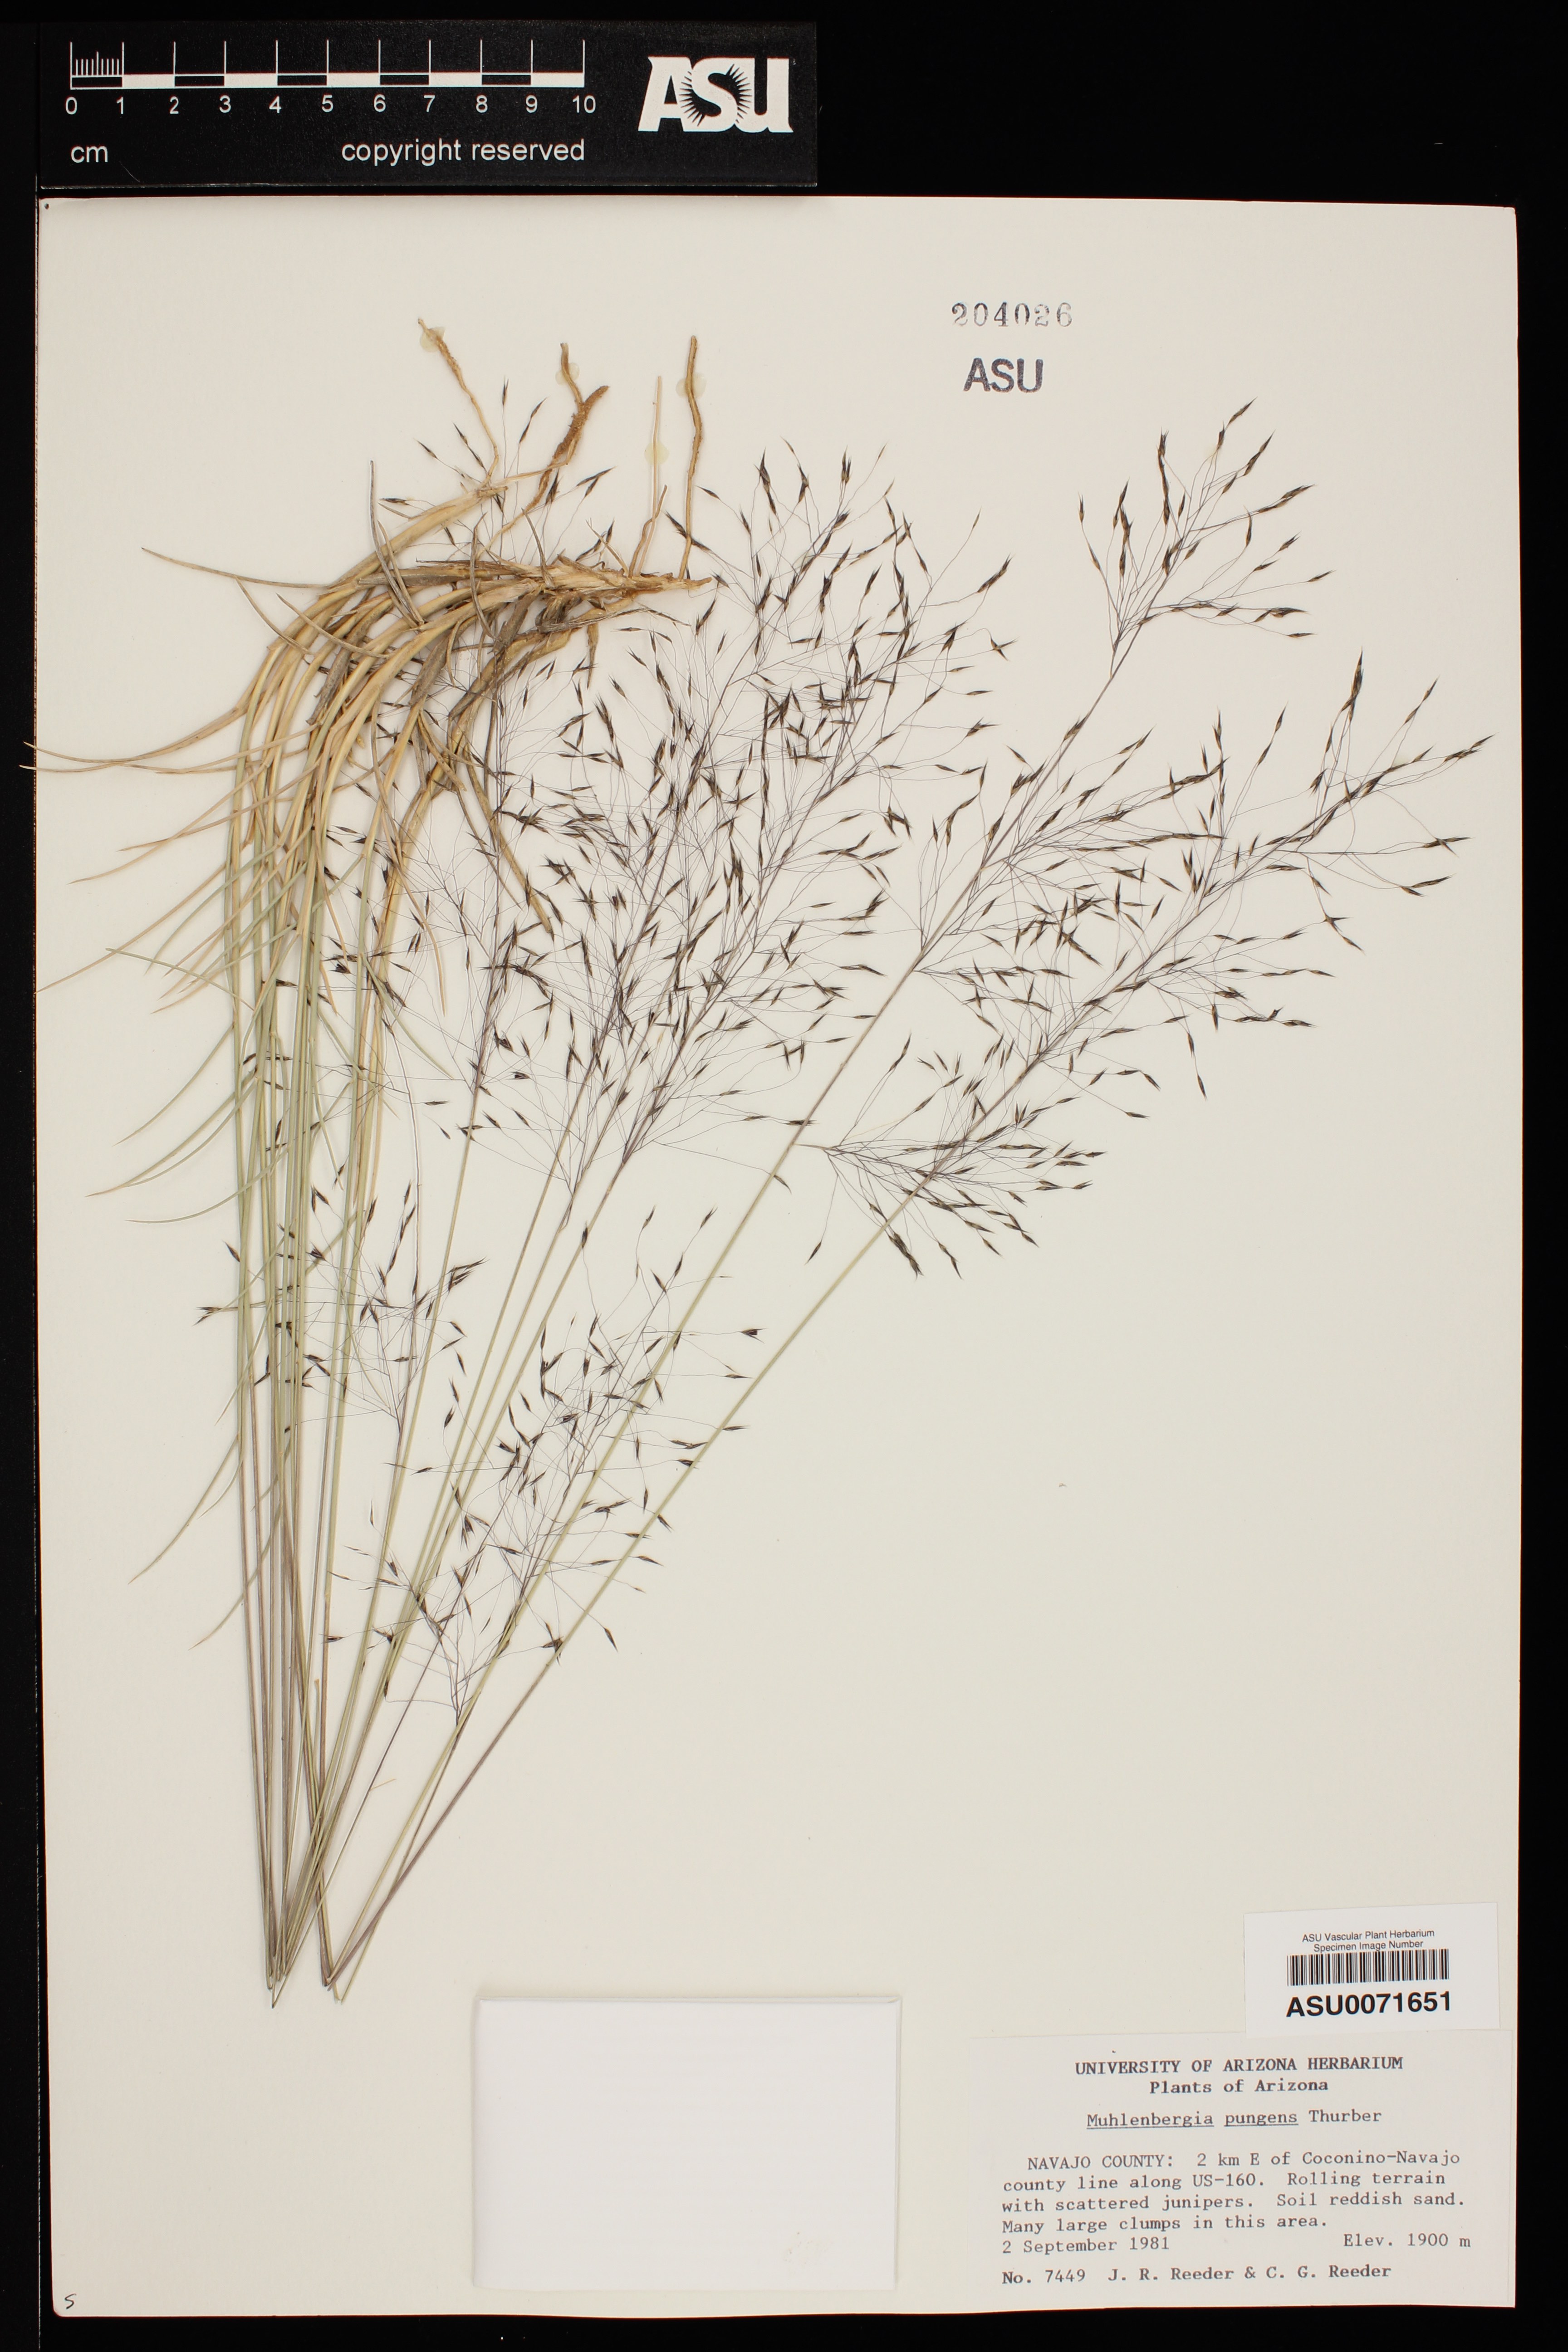 Herbarium photo of a clump of grass showing leaves and copious seedheads